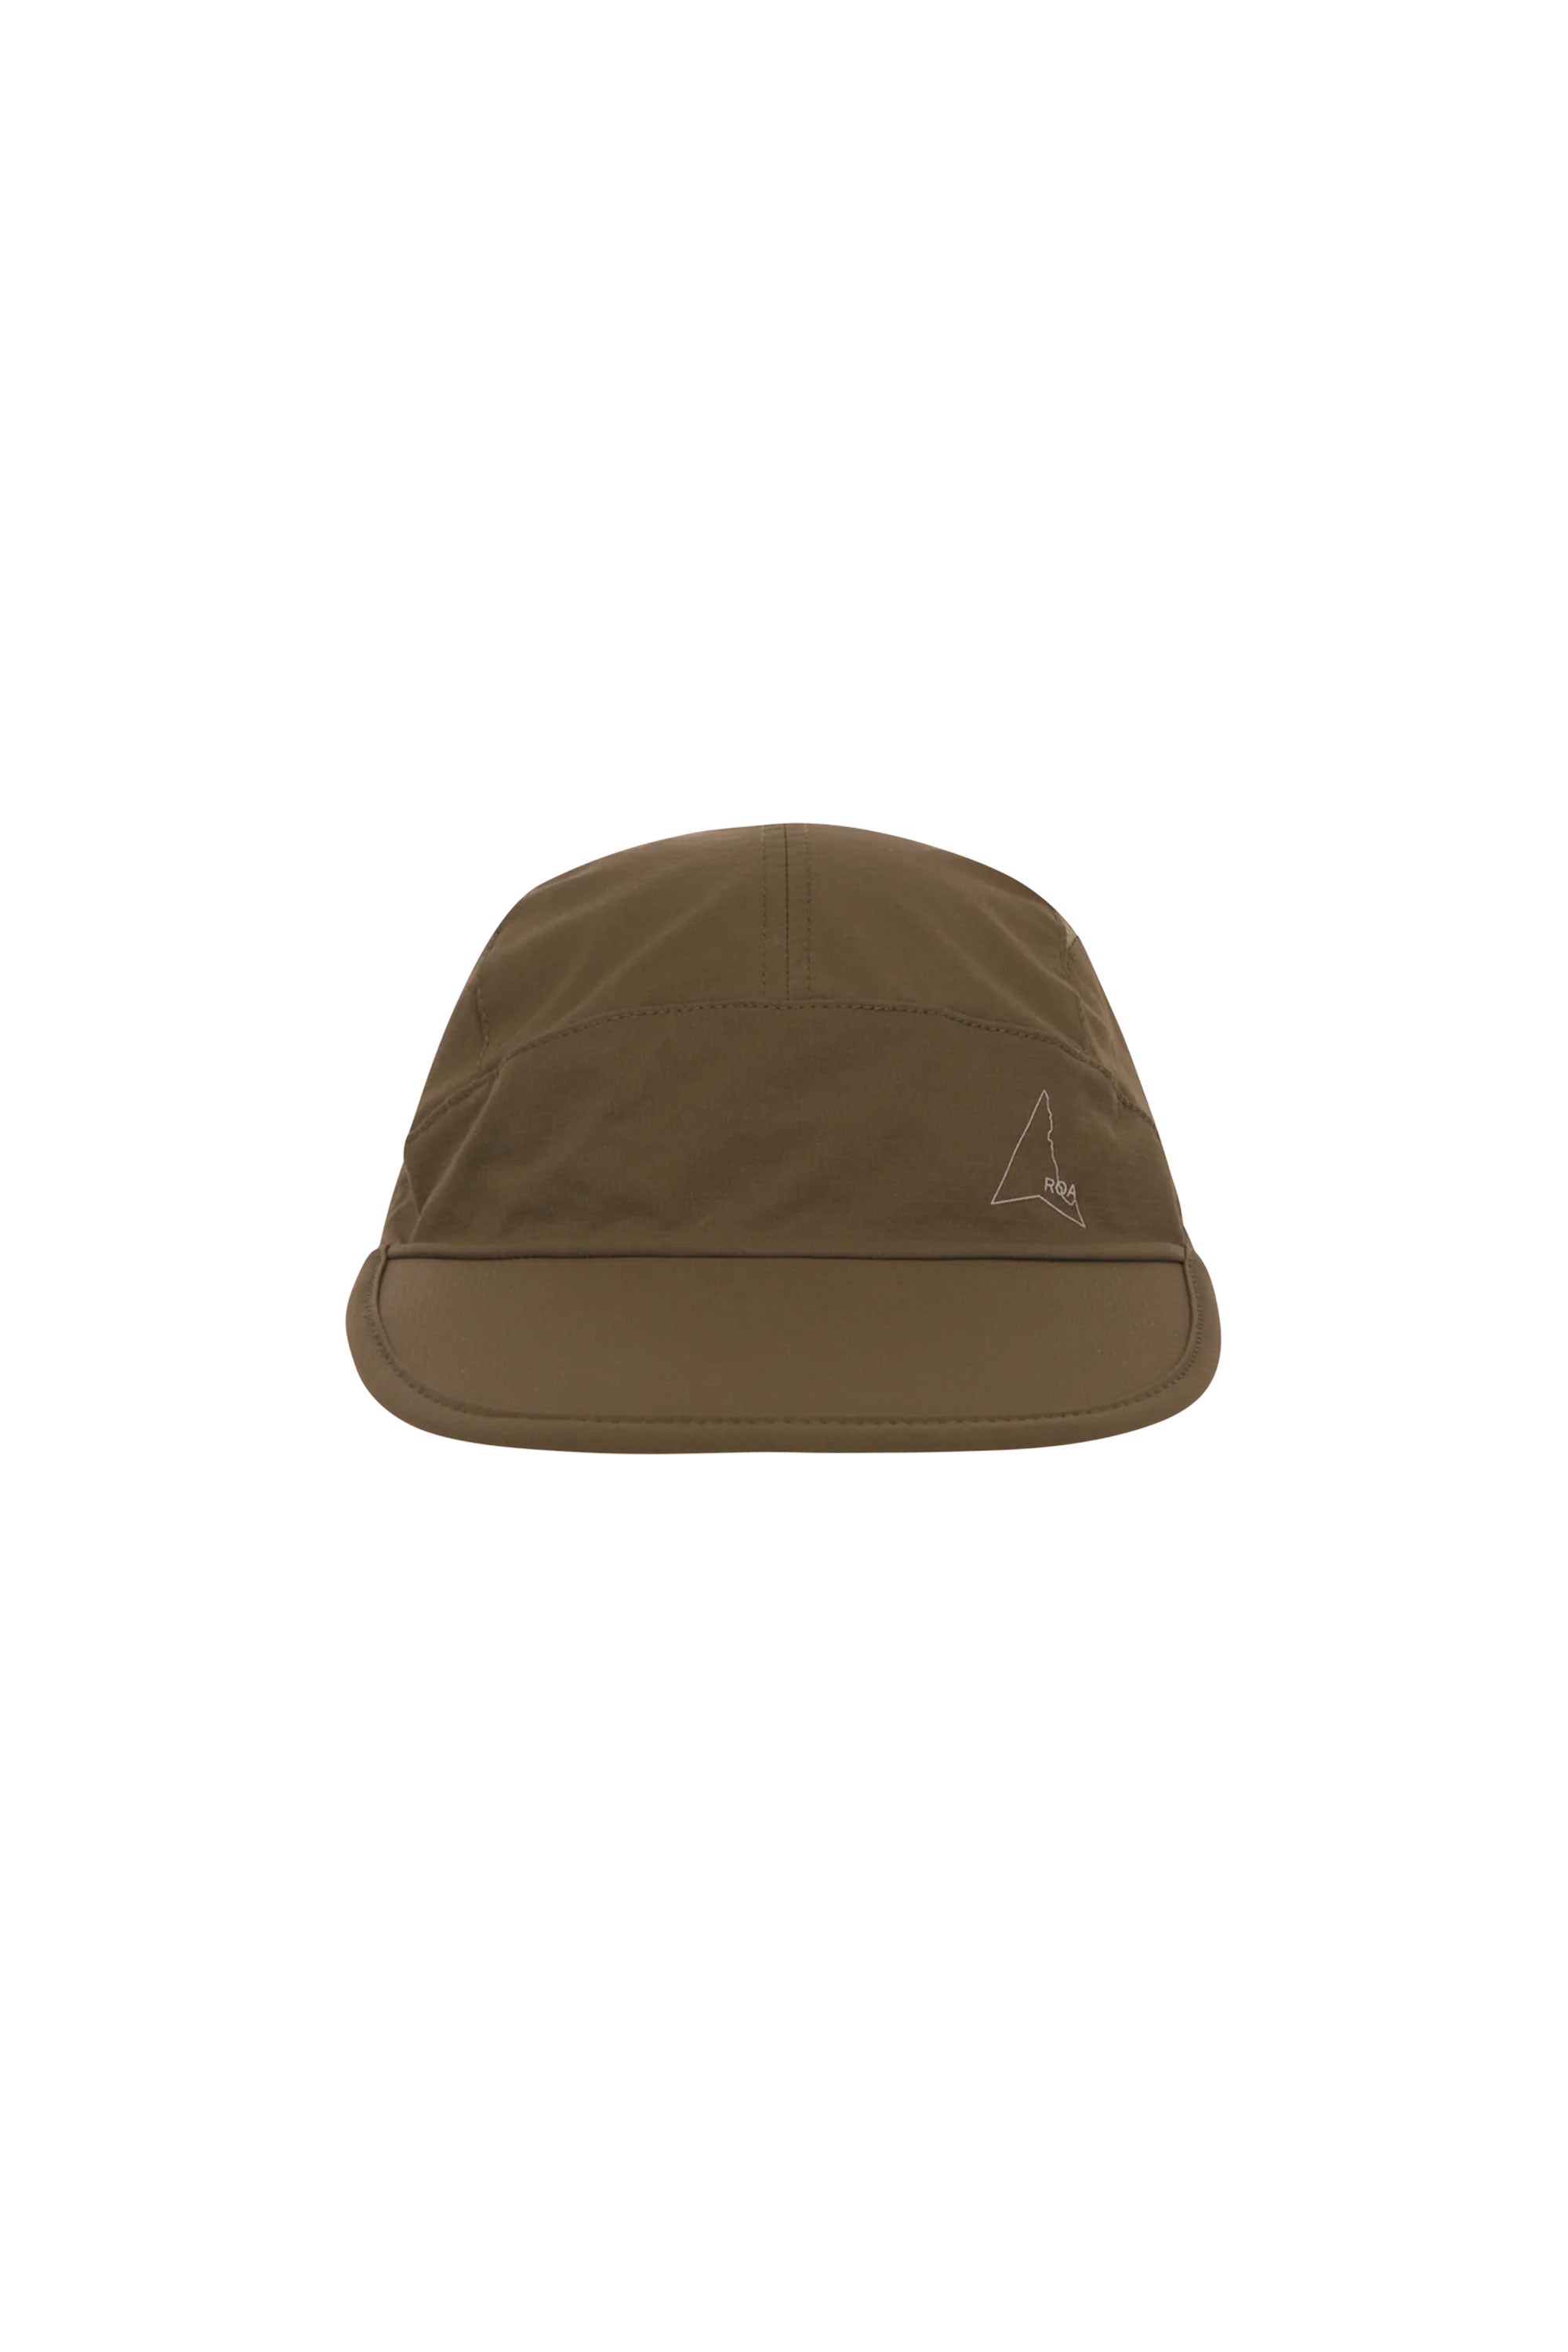 The ROA - SAHARAN CAP  available online with global shipping, and in PAM Stores Melbourne and Sydney.